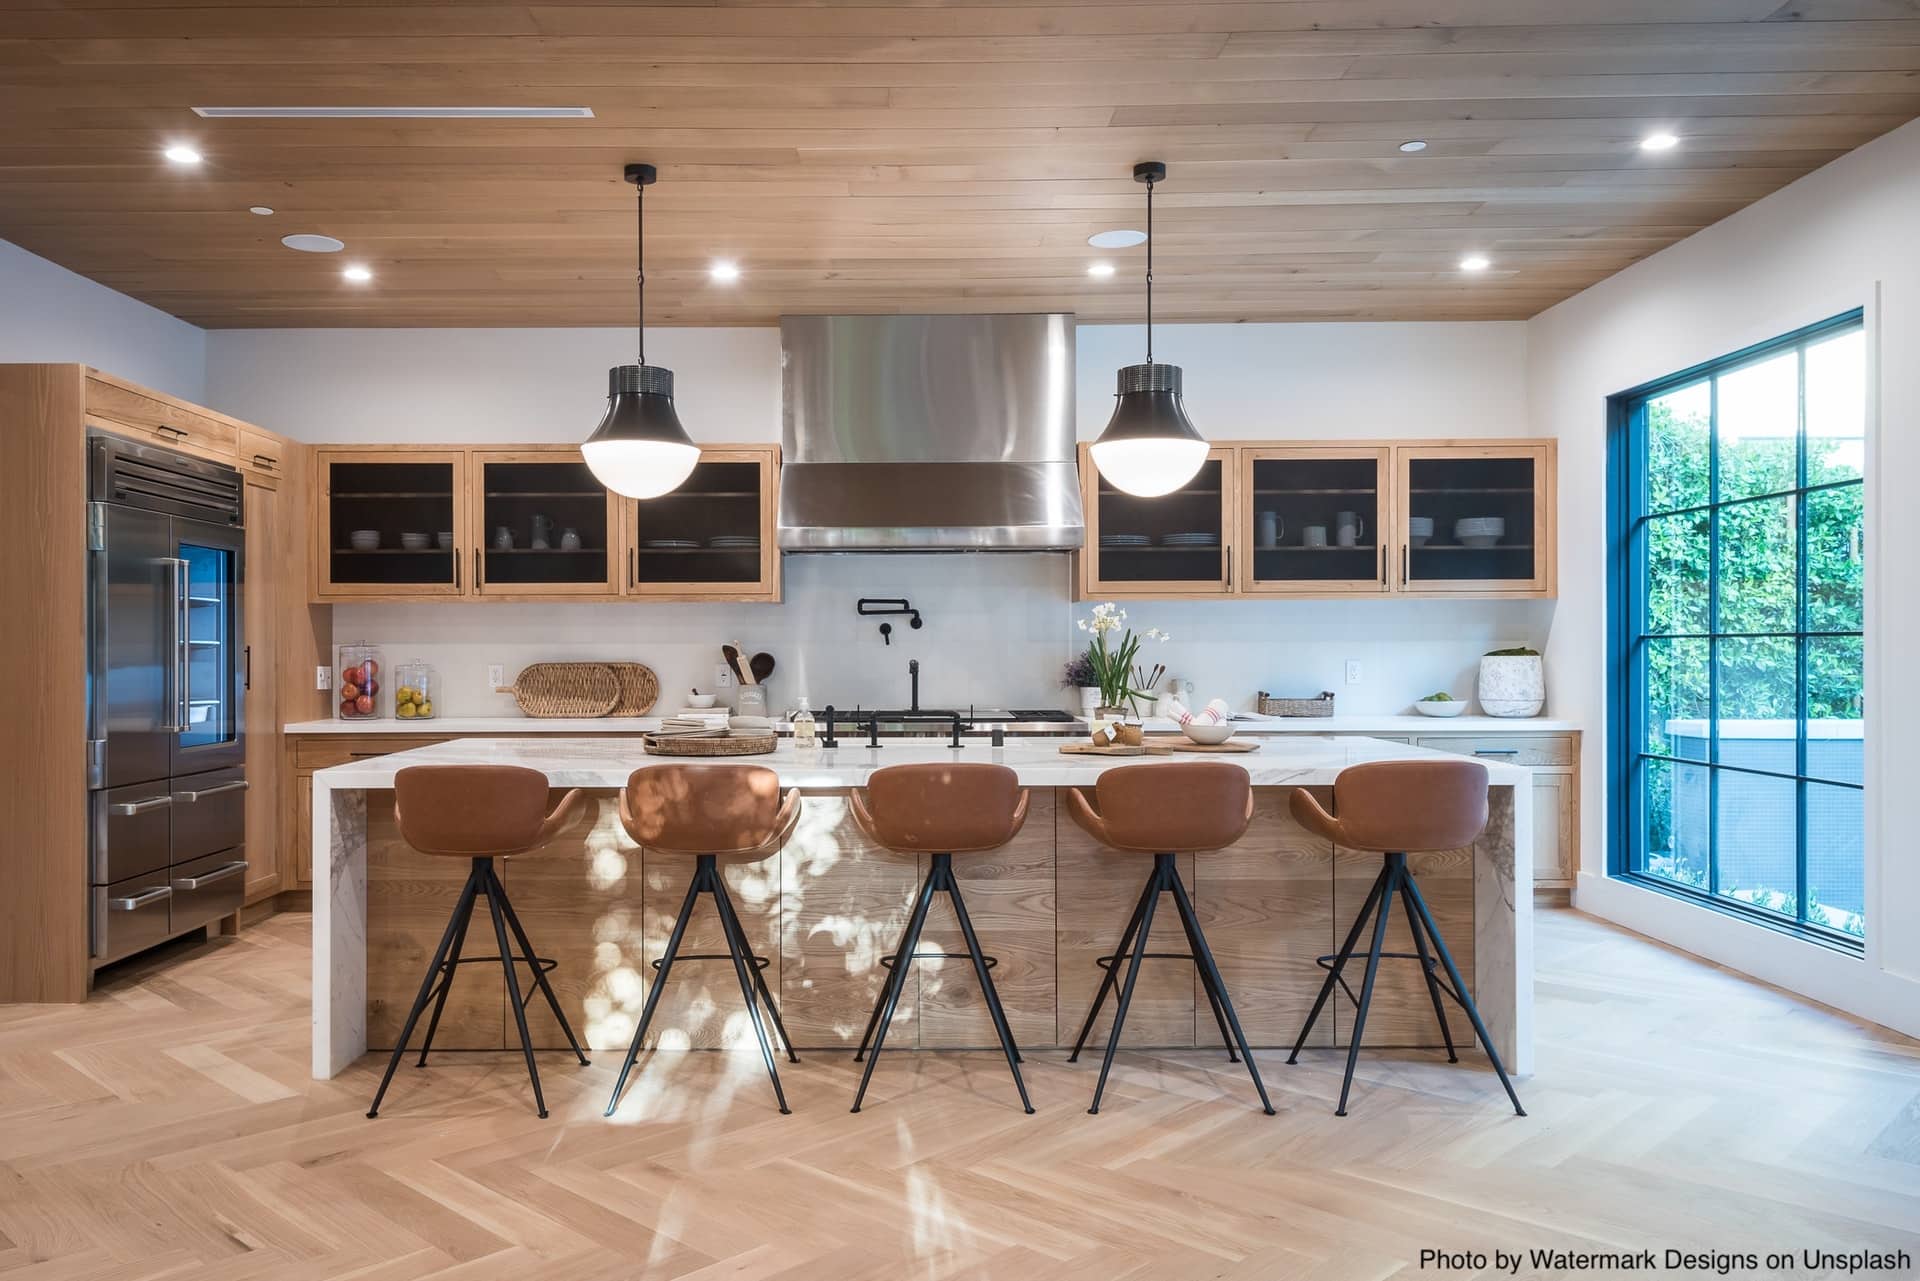 Kitchen Trends 2021 You Must Keep an Eye On Before Remodeling